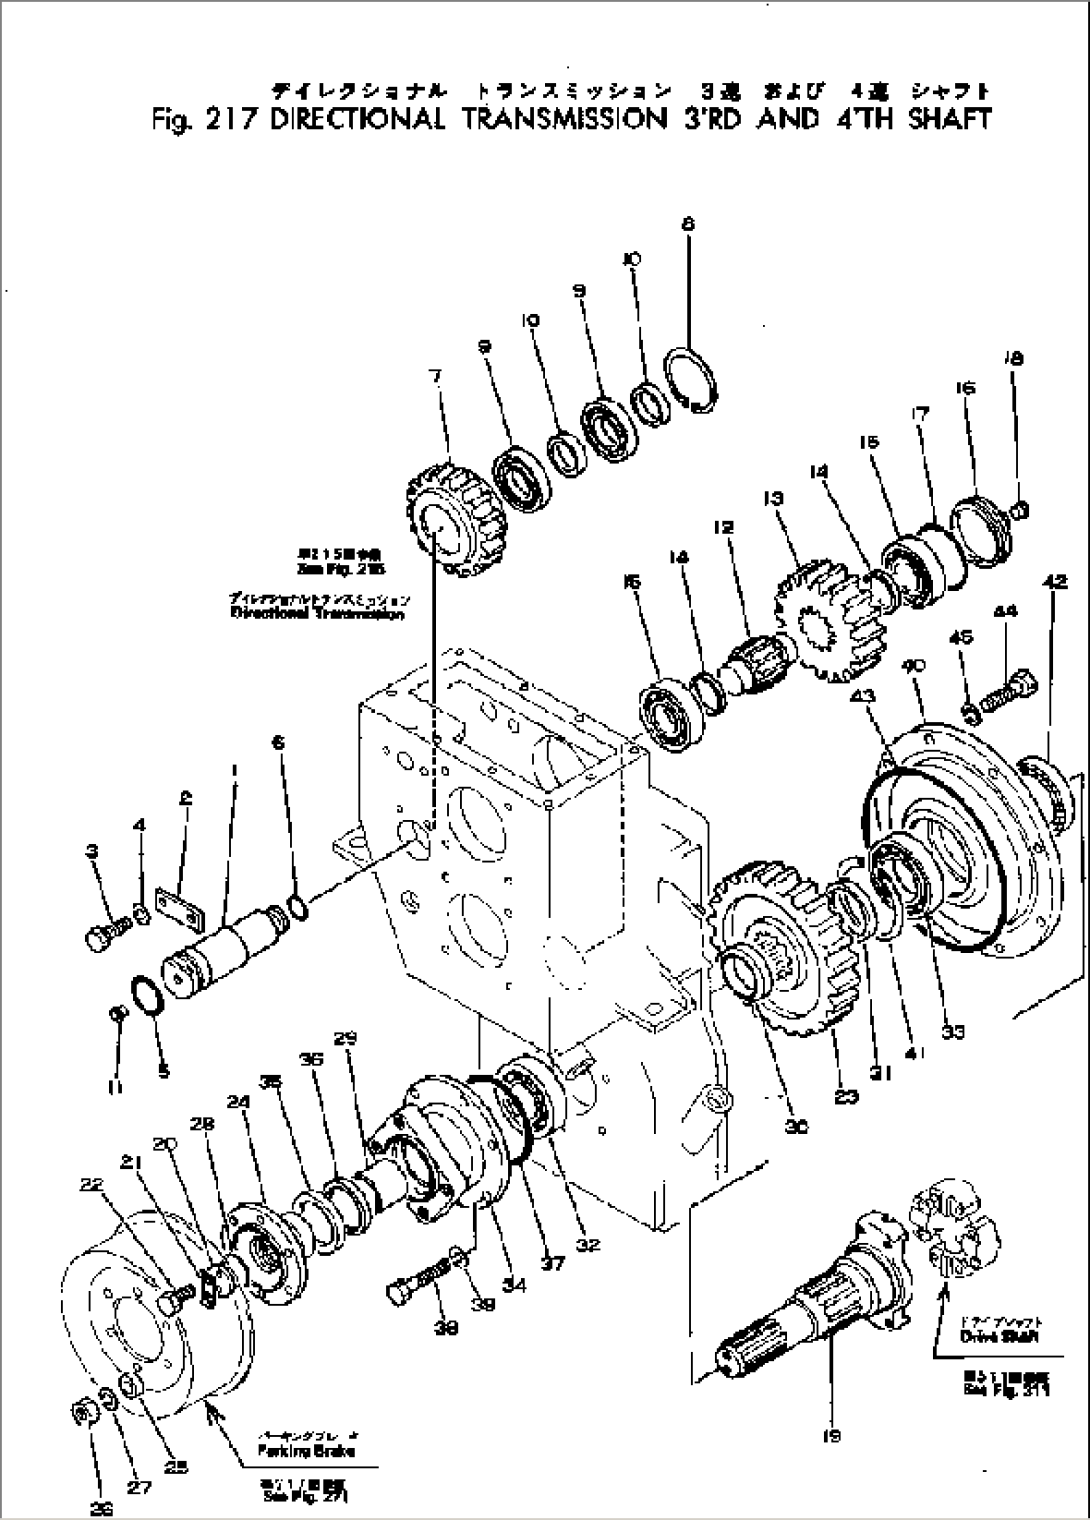 DIRECTIONAL TRANSMISSION 3RD AND 4TH SHAFT